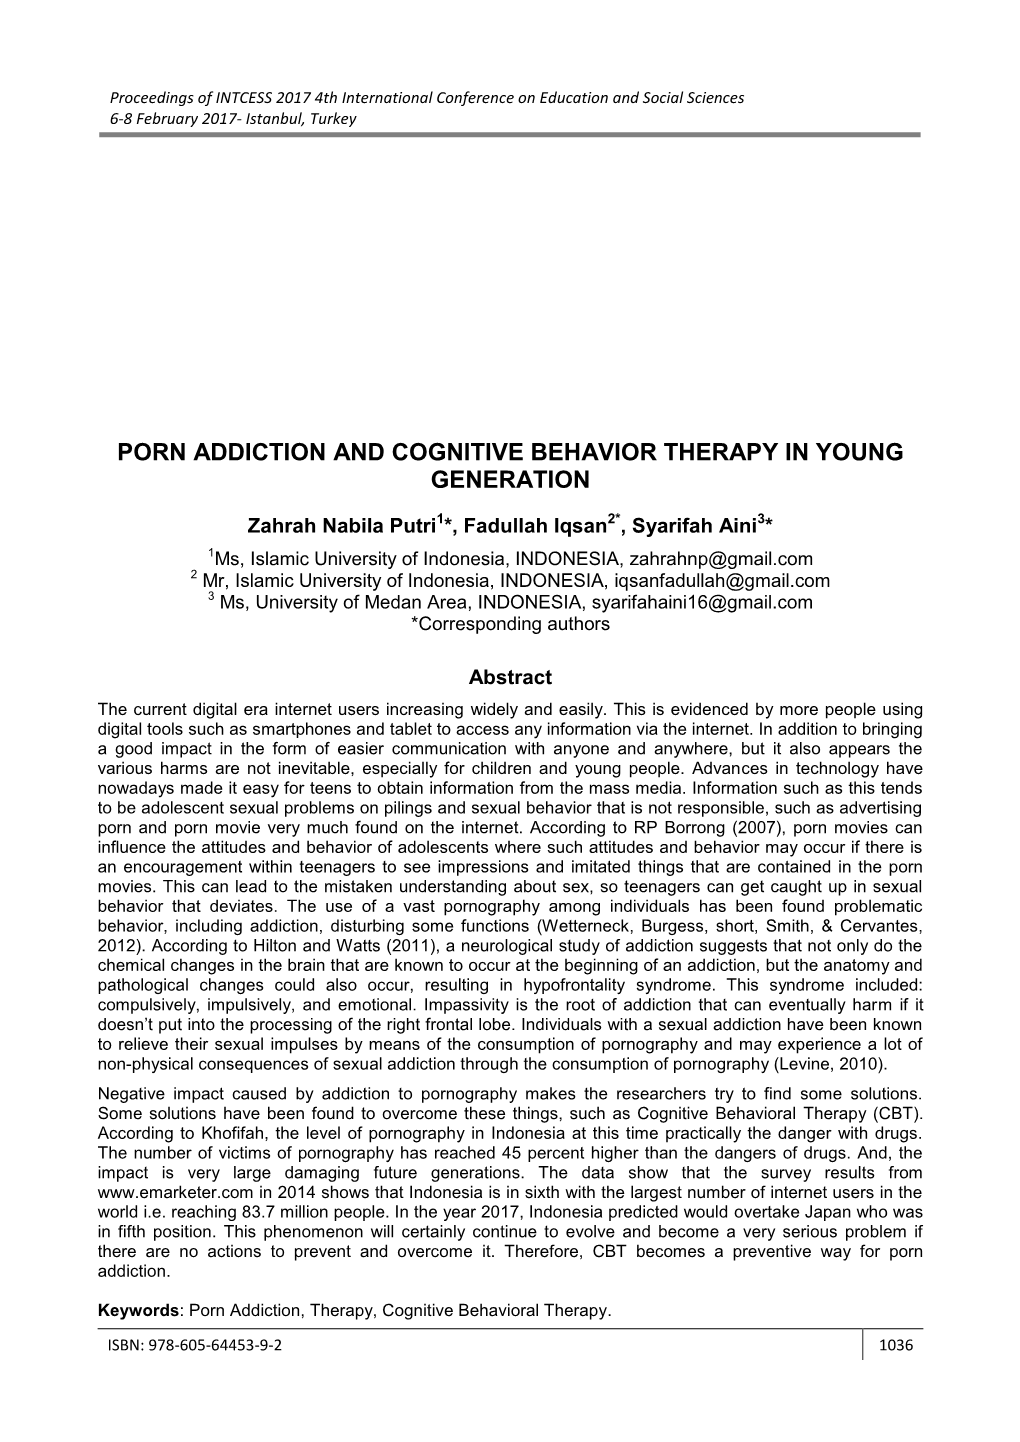 Porn Addiction and Cognitive Behavior Therapy in Young Generation